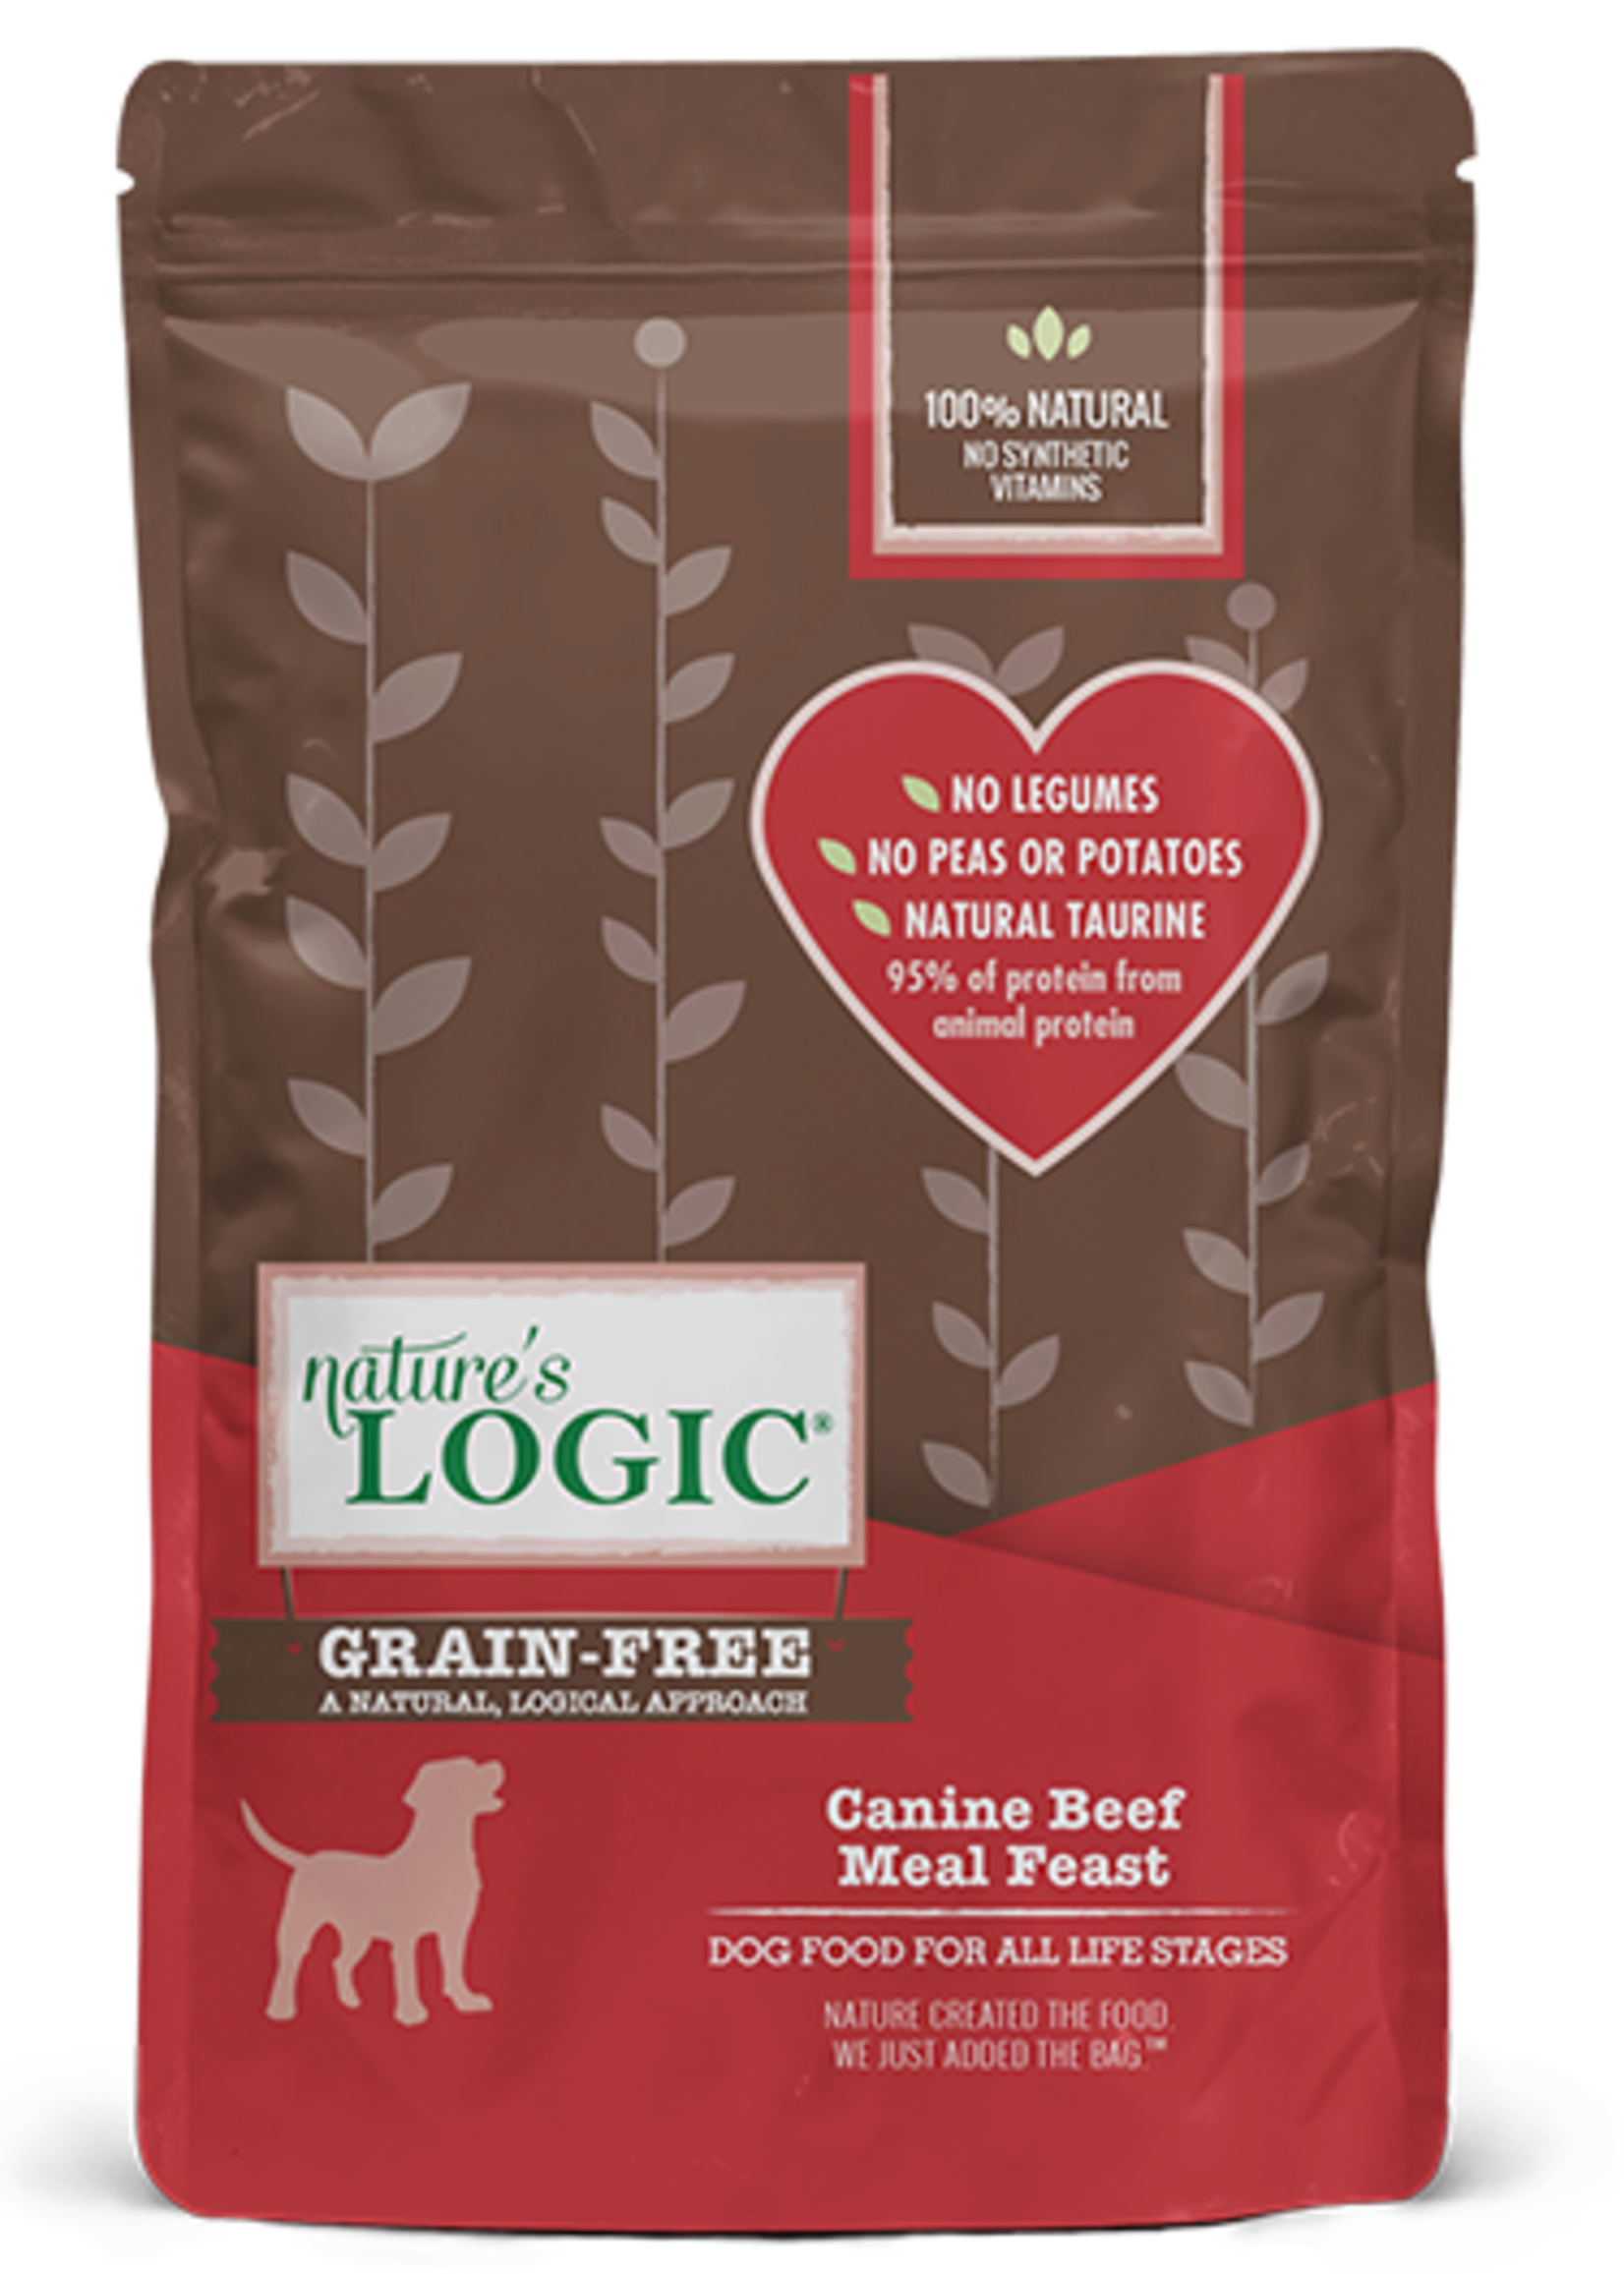 Nature's Logic Nature's Logic Canine Beef Meal Feast Grain-Free Dry Dog Food 25lbs